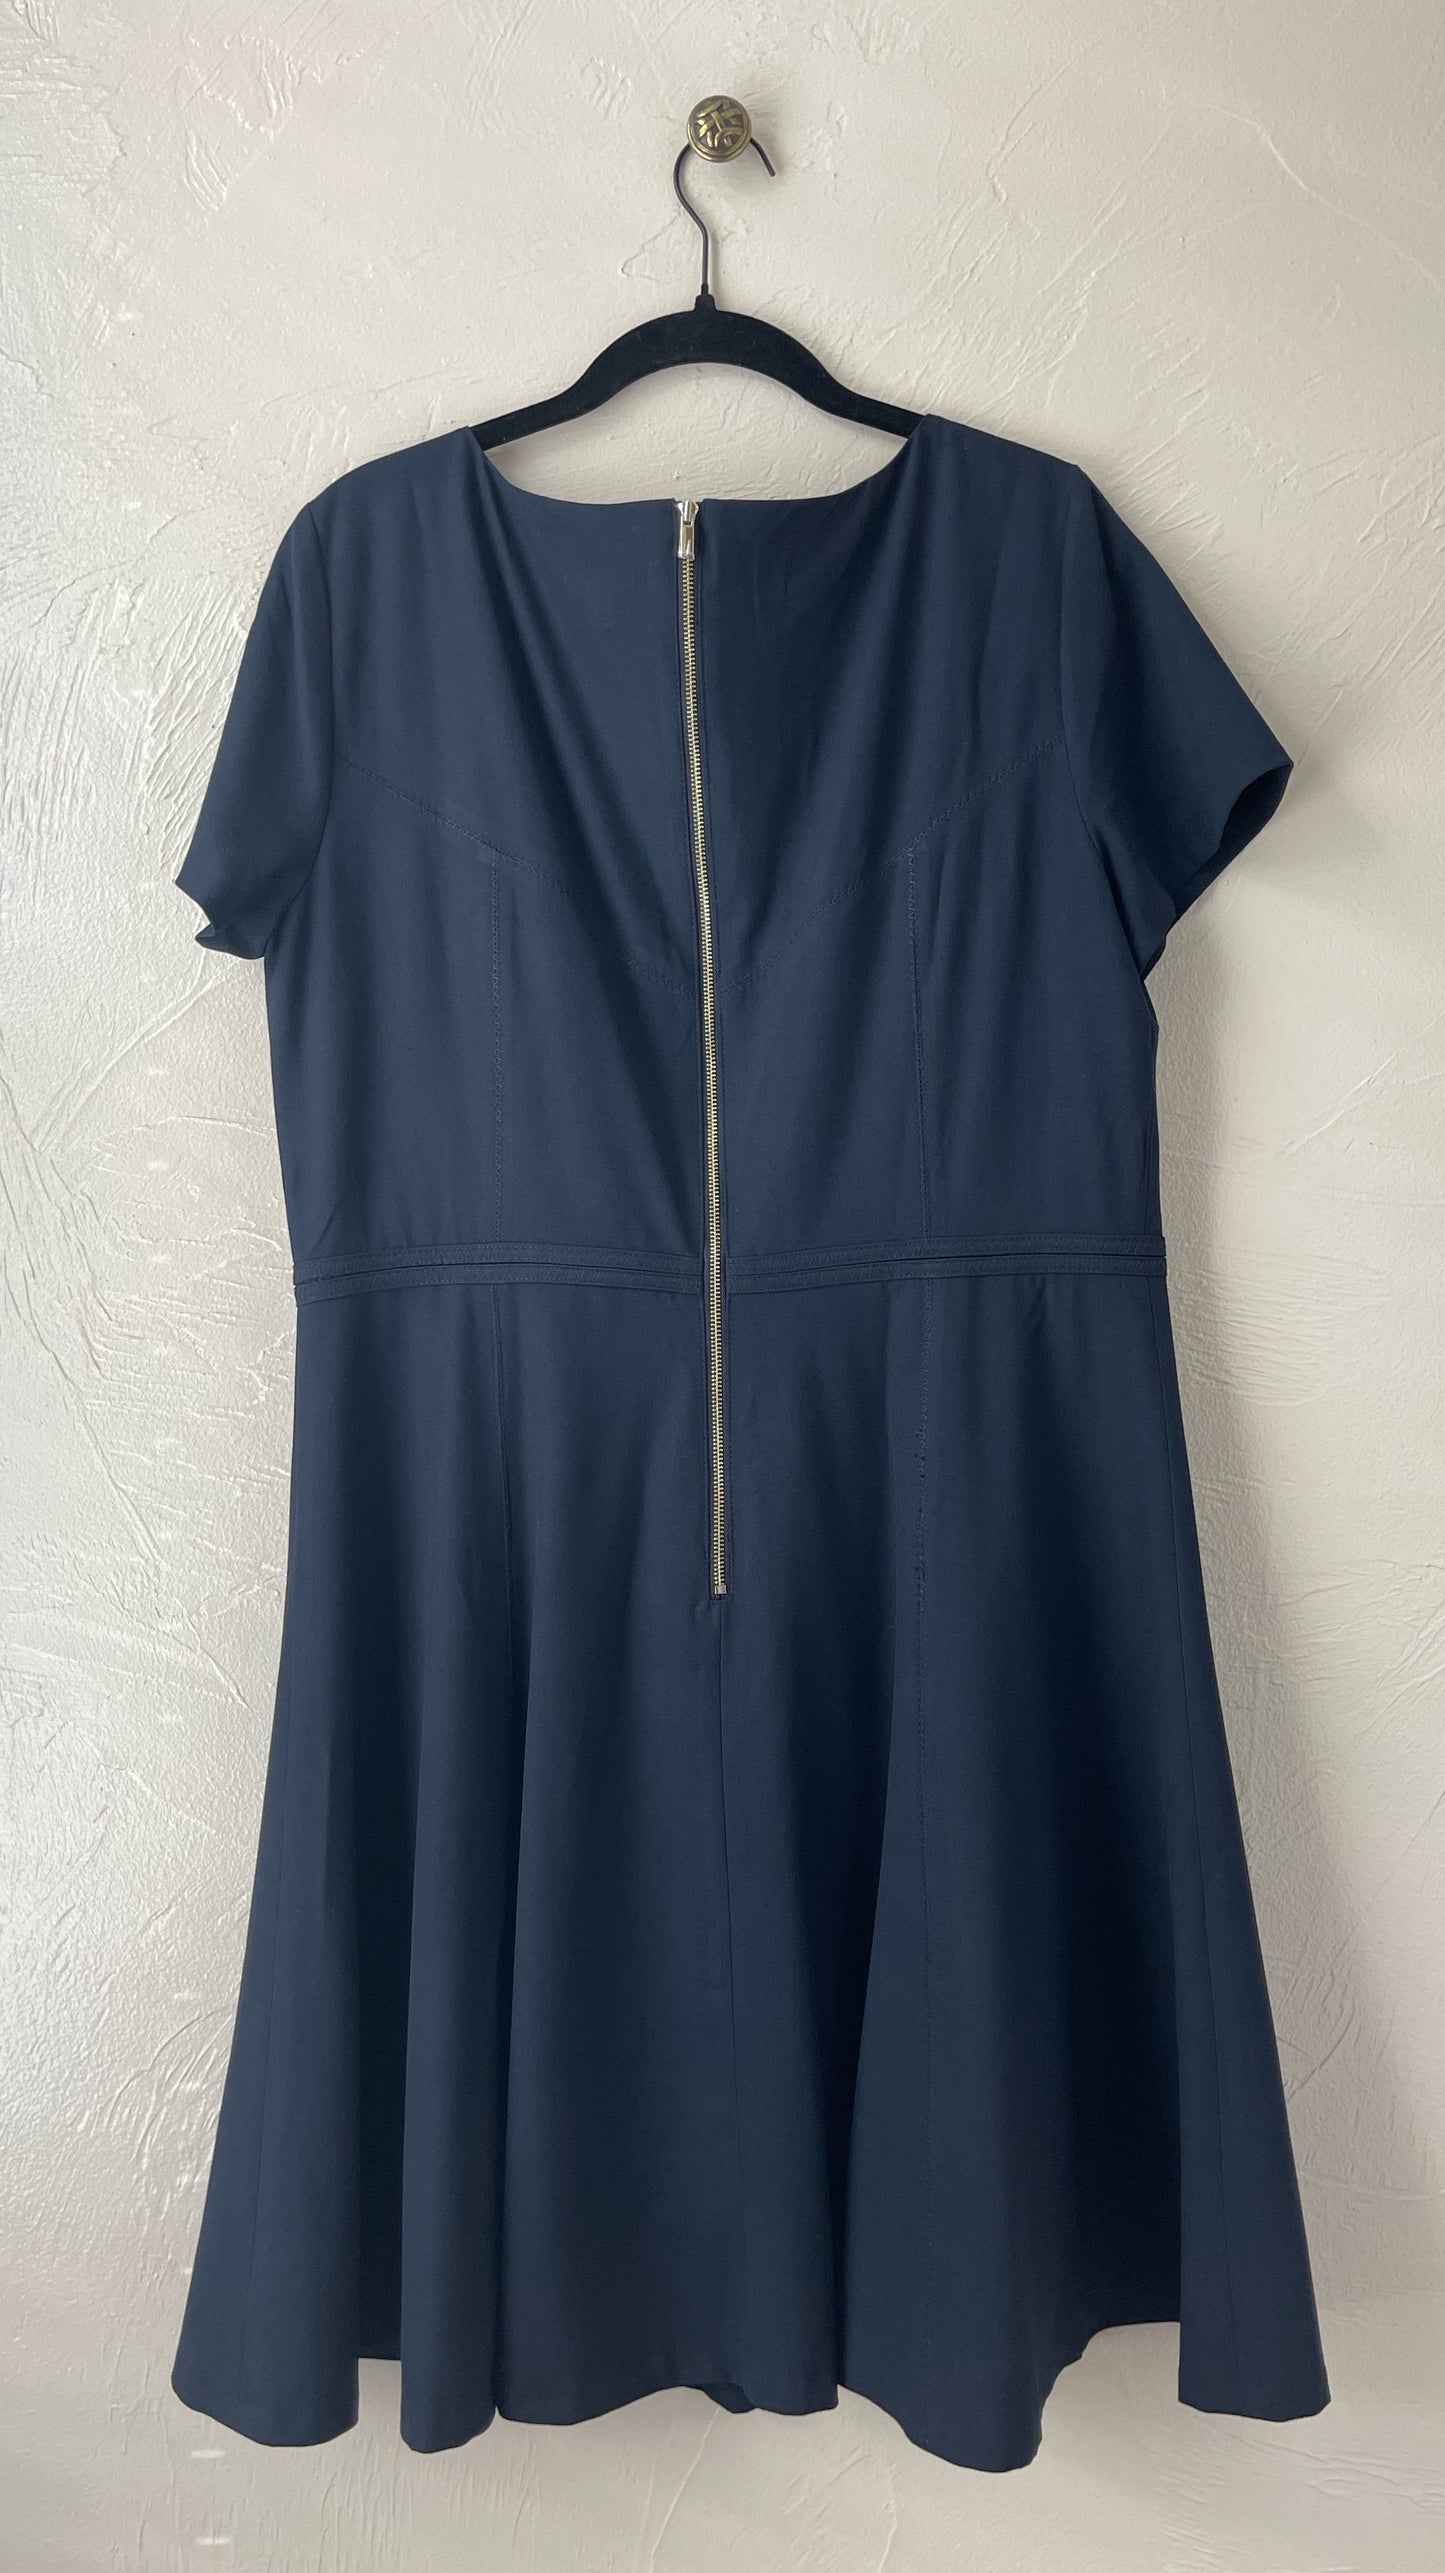 Fit & Flare Navy Blue Dress